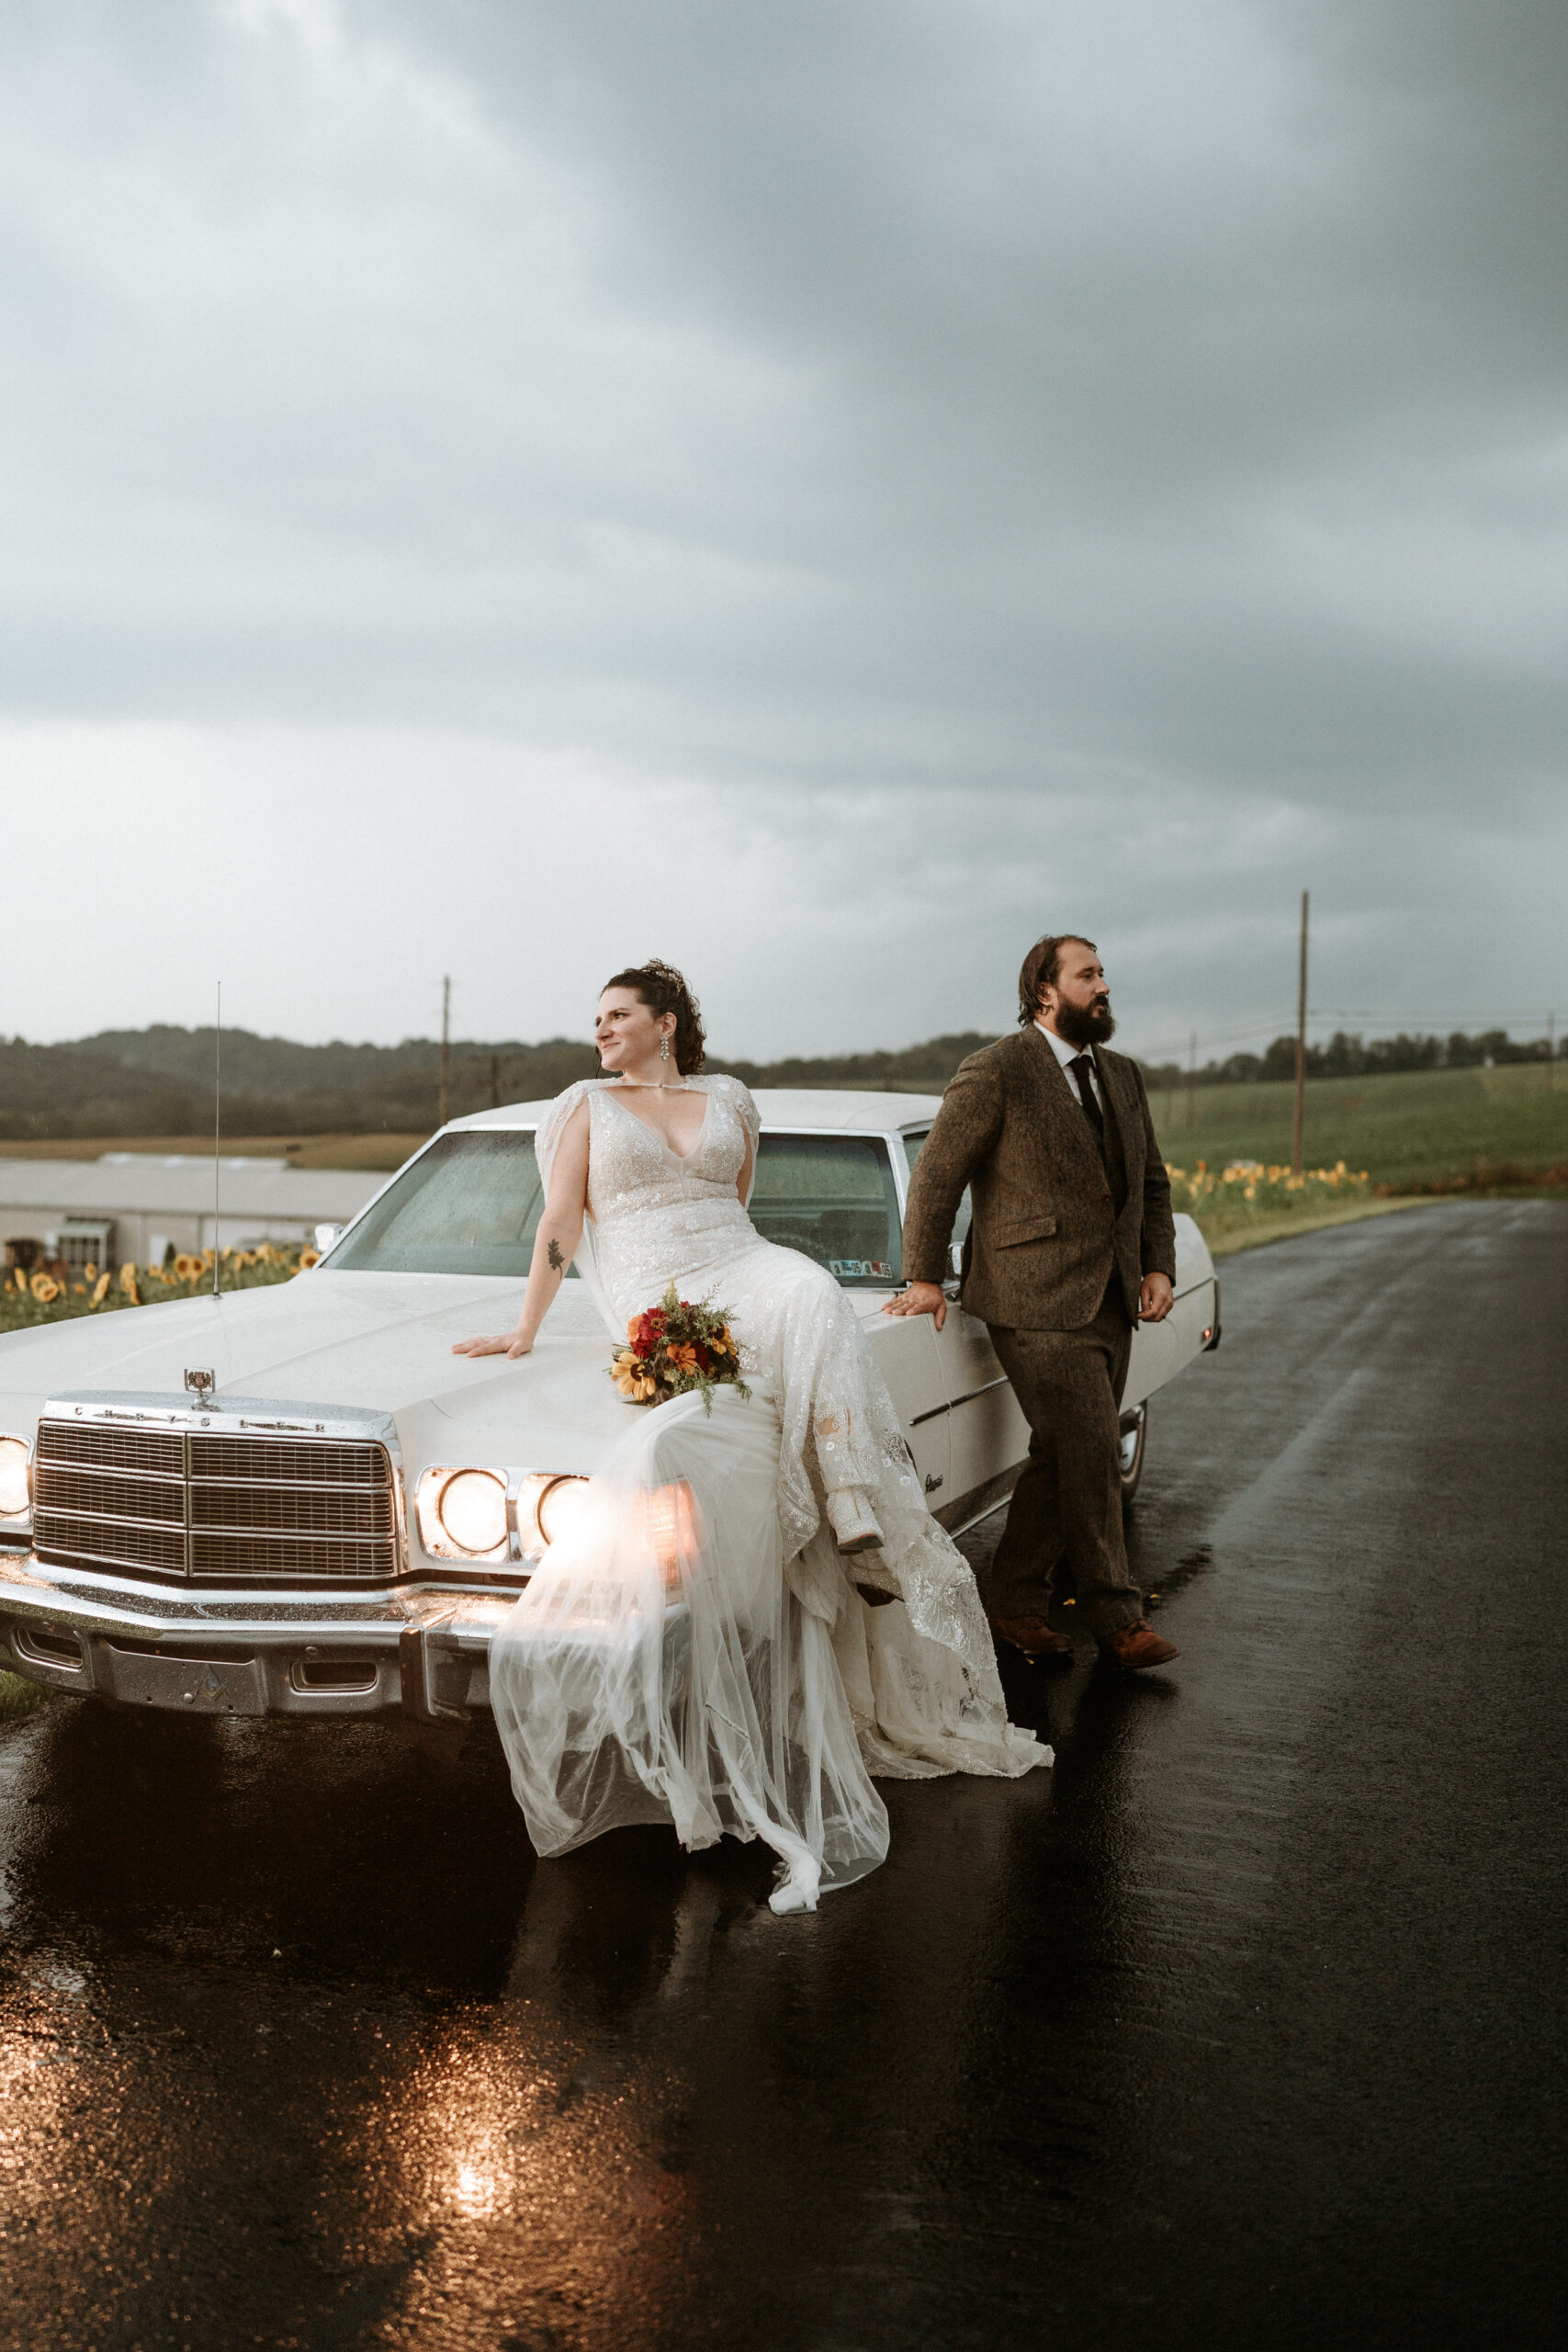 A rainy anniversary session with their vintage car